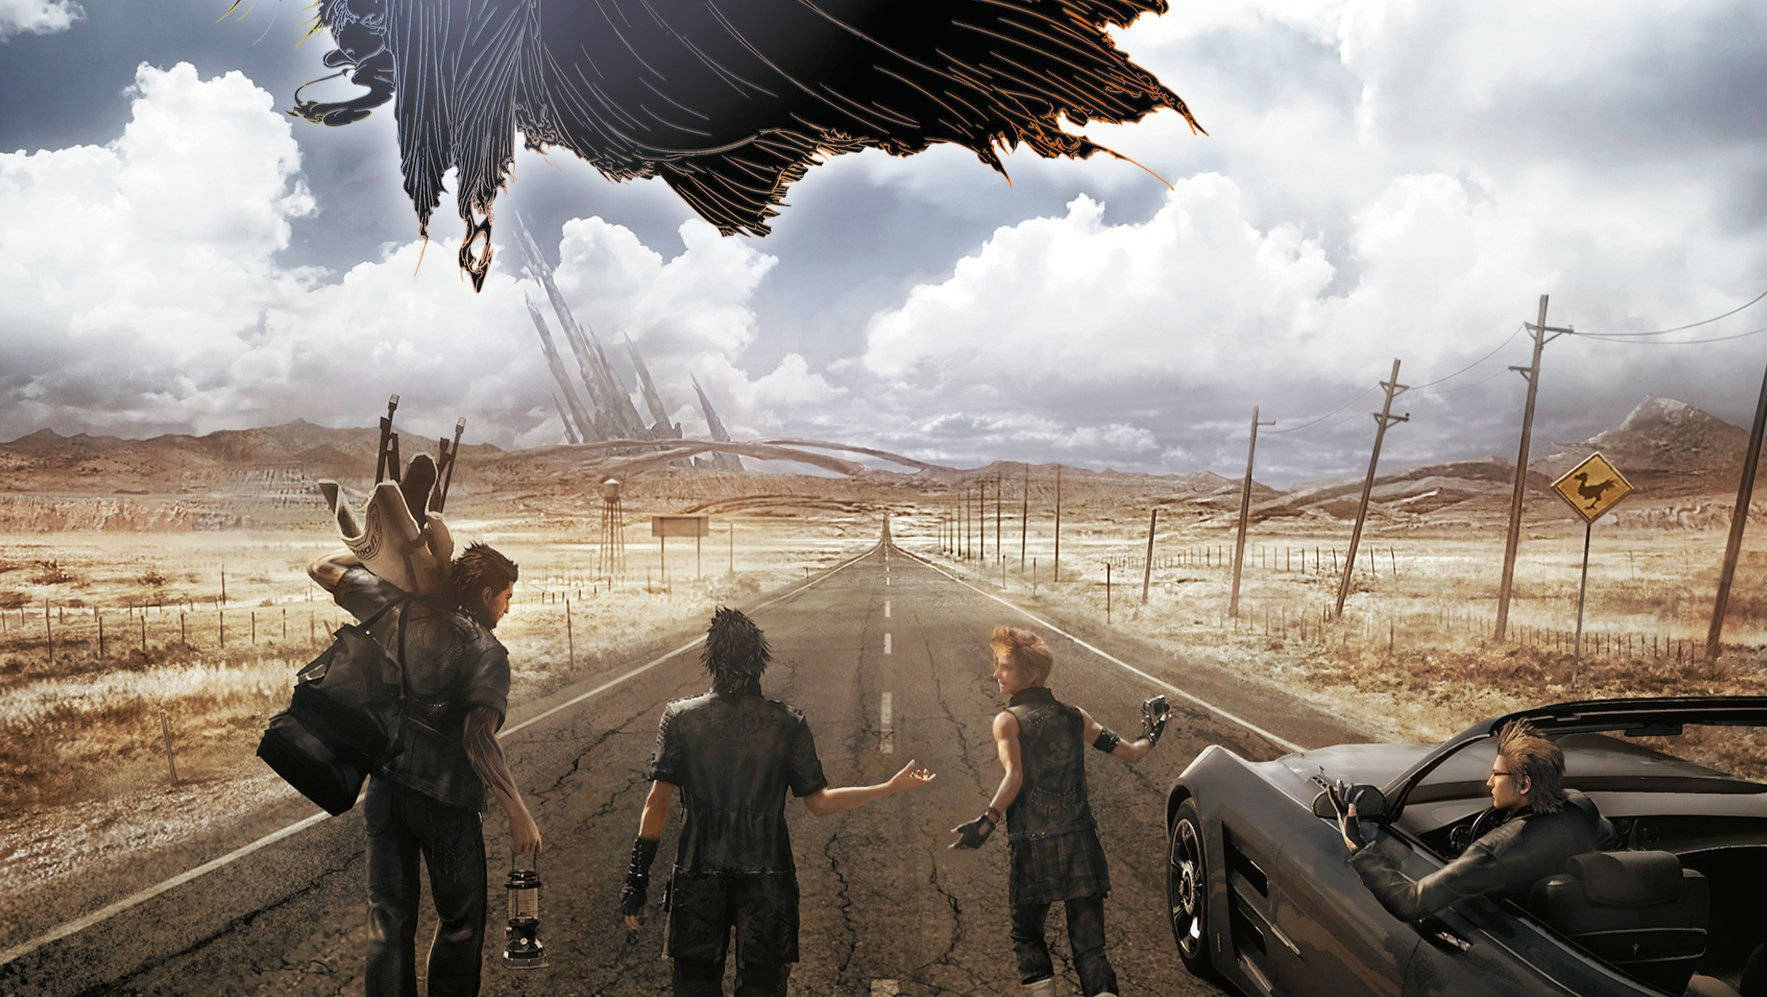 Final Fantasy Xv Noctis And Friends Background